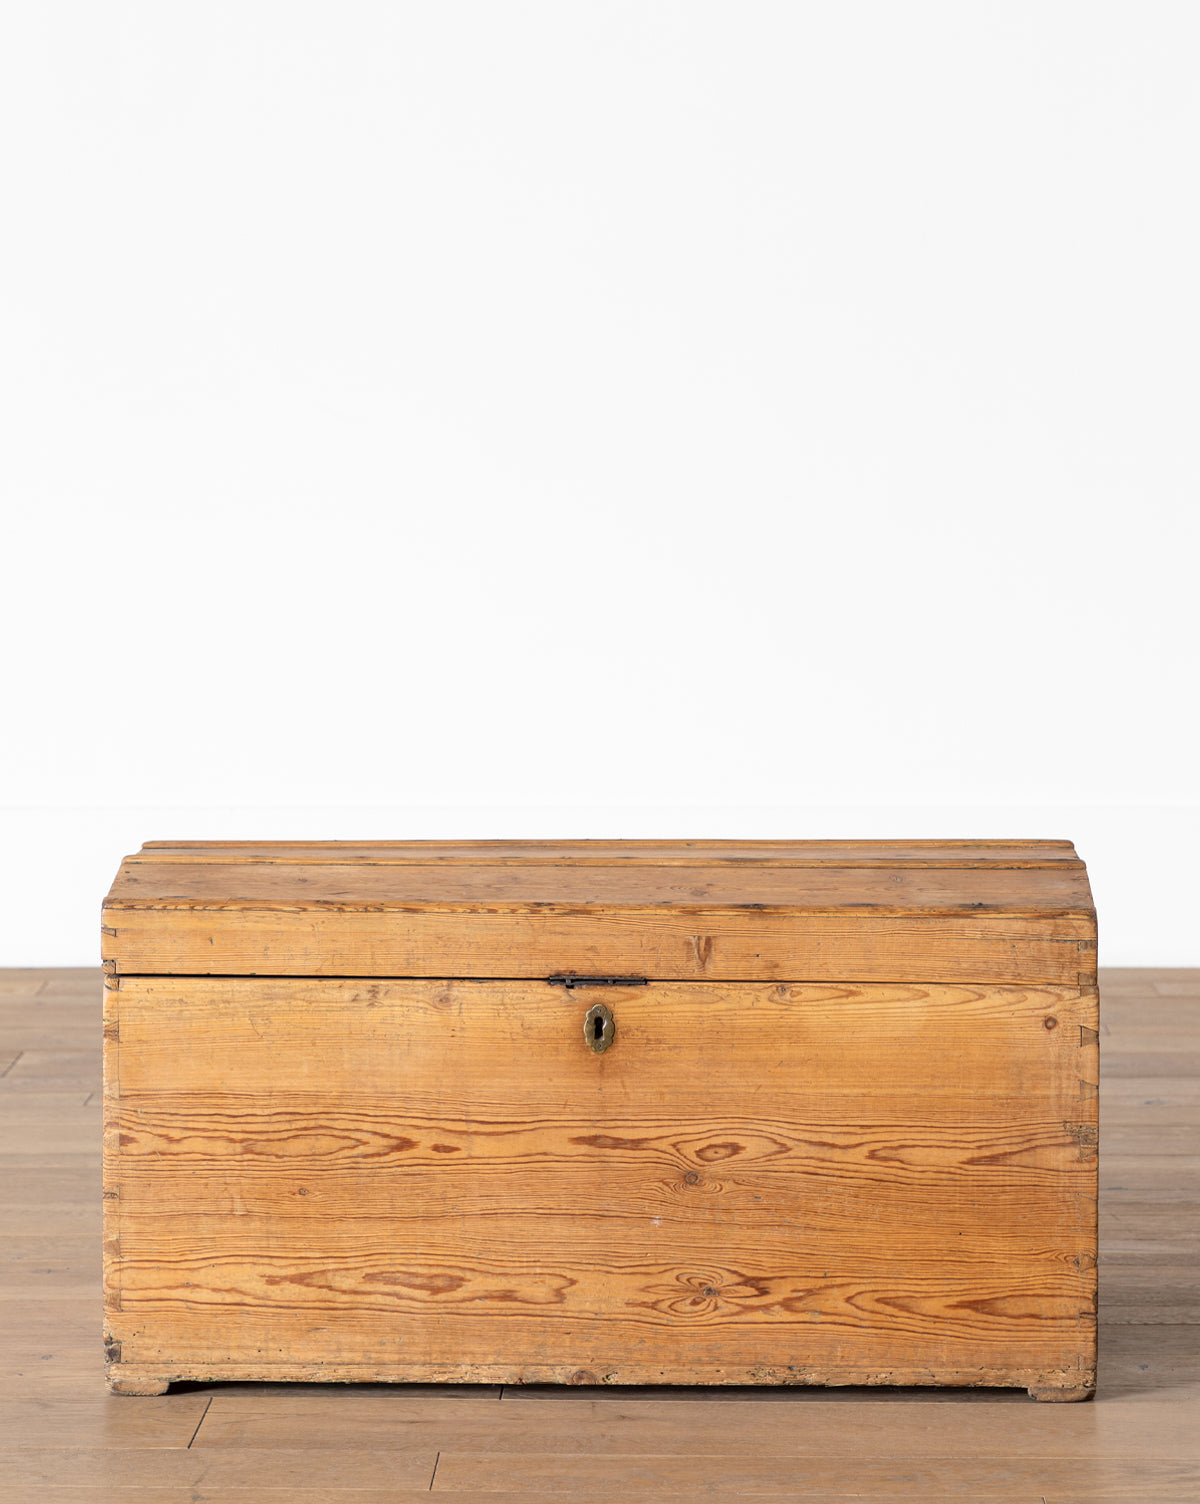 McGee & Co., Vintage Wooden Trunk